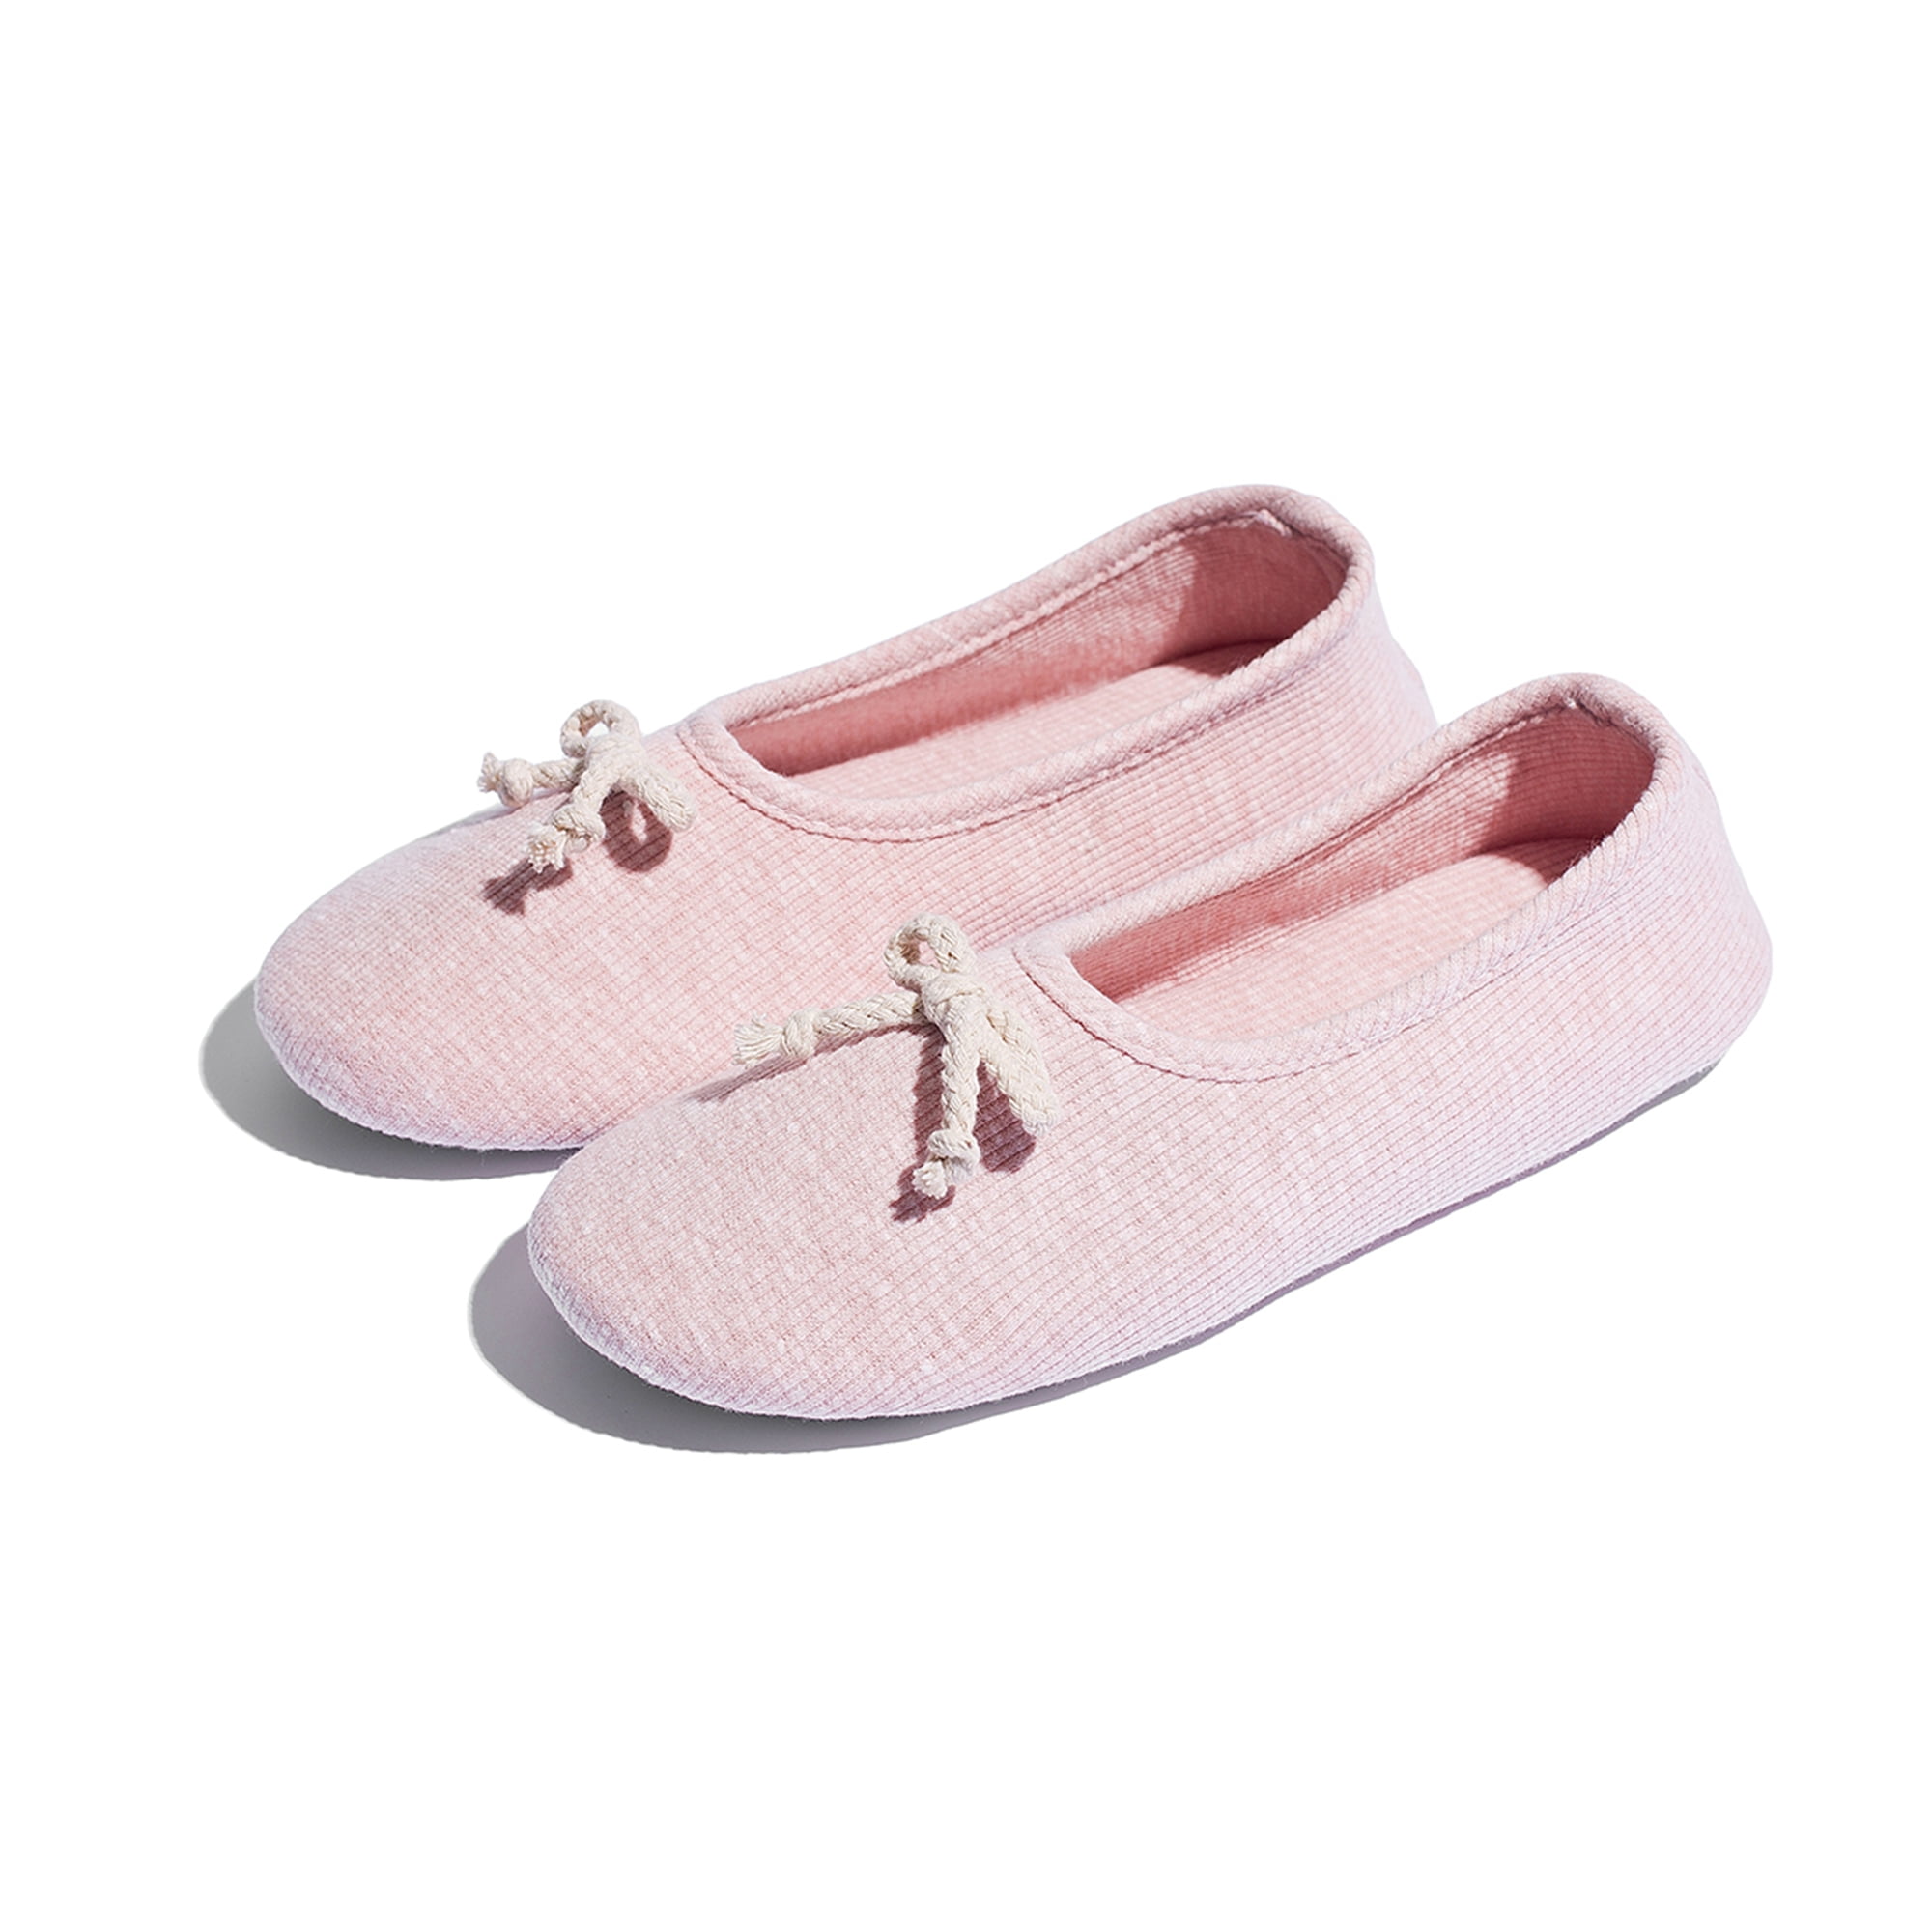 Women's Ballerina House Slippers Anti-Skid Comfy Warm Style Slippers Confinement Shoes Comfy Warm Ballet Style - Walmart.com